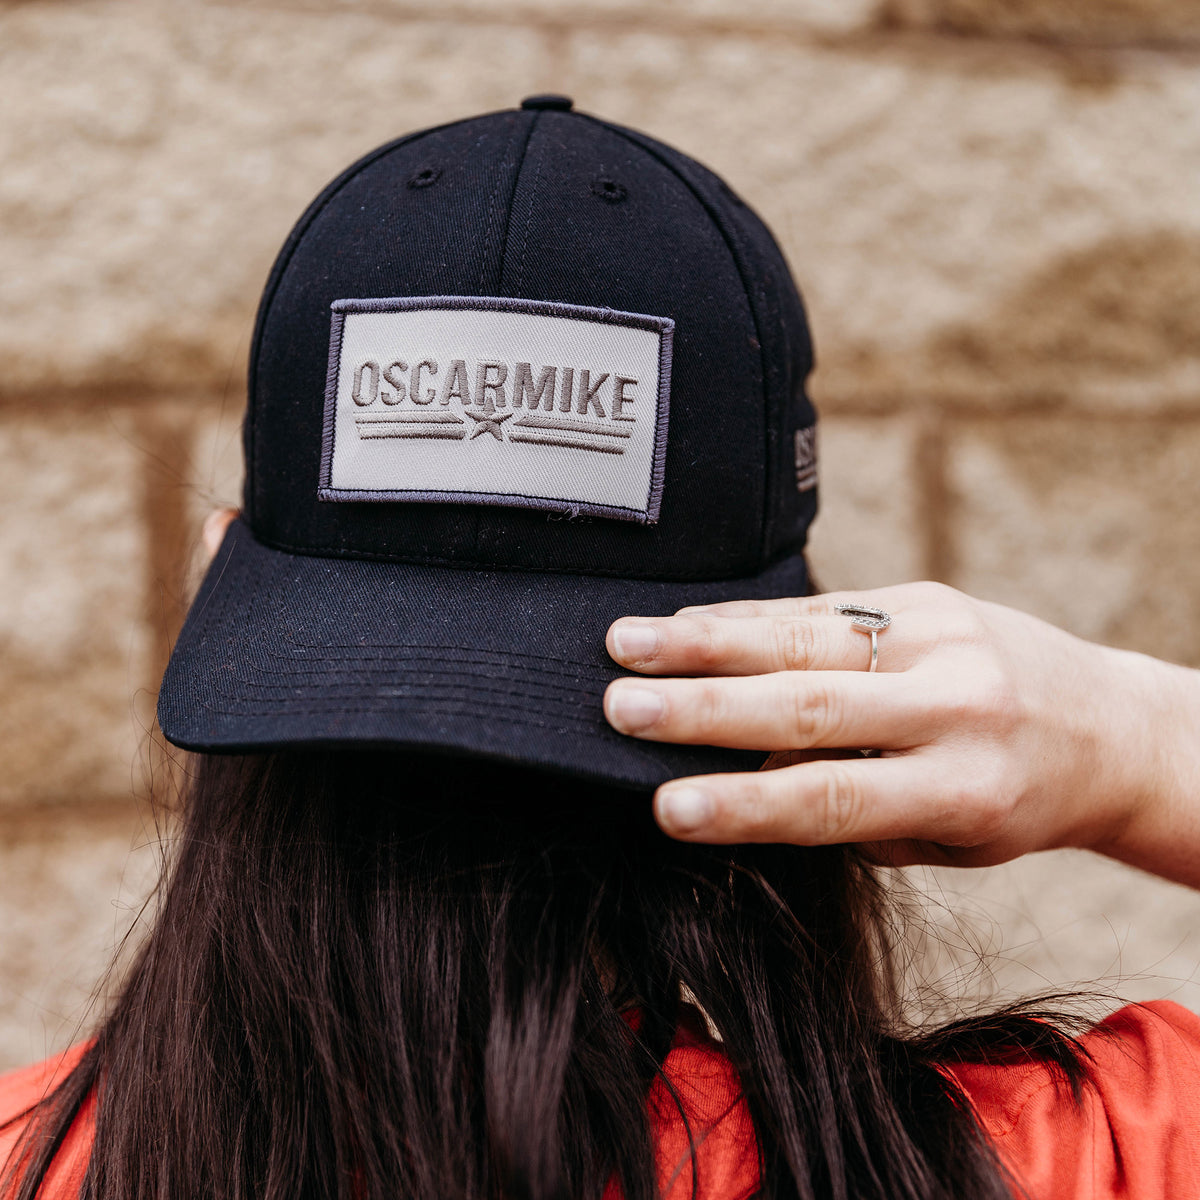 Mission hats, off 53% clearance 